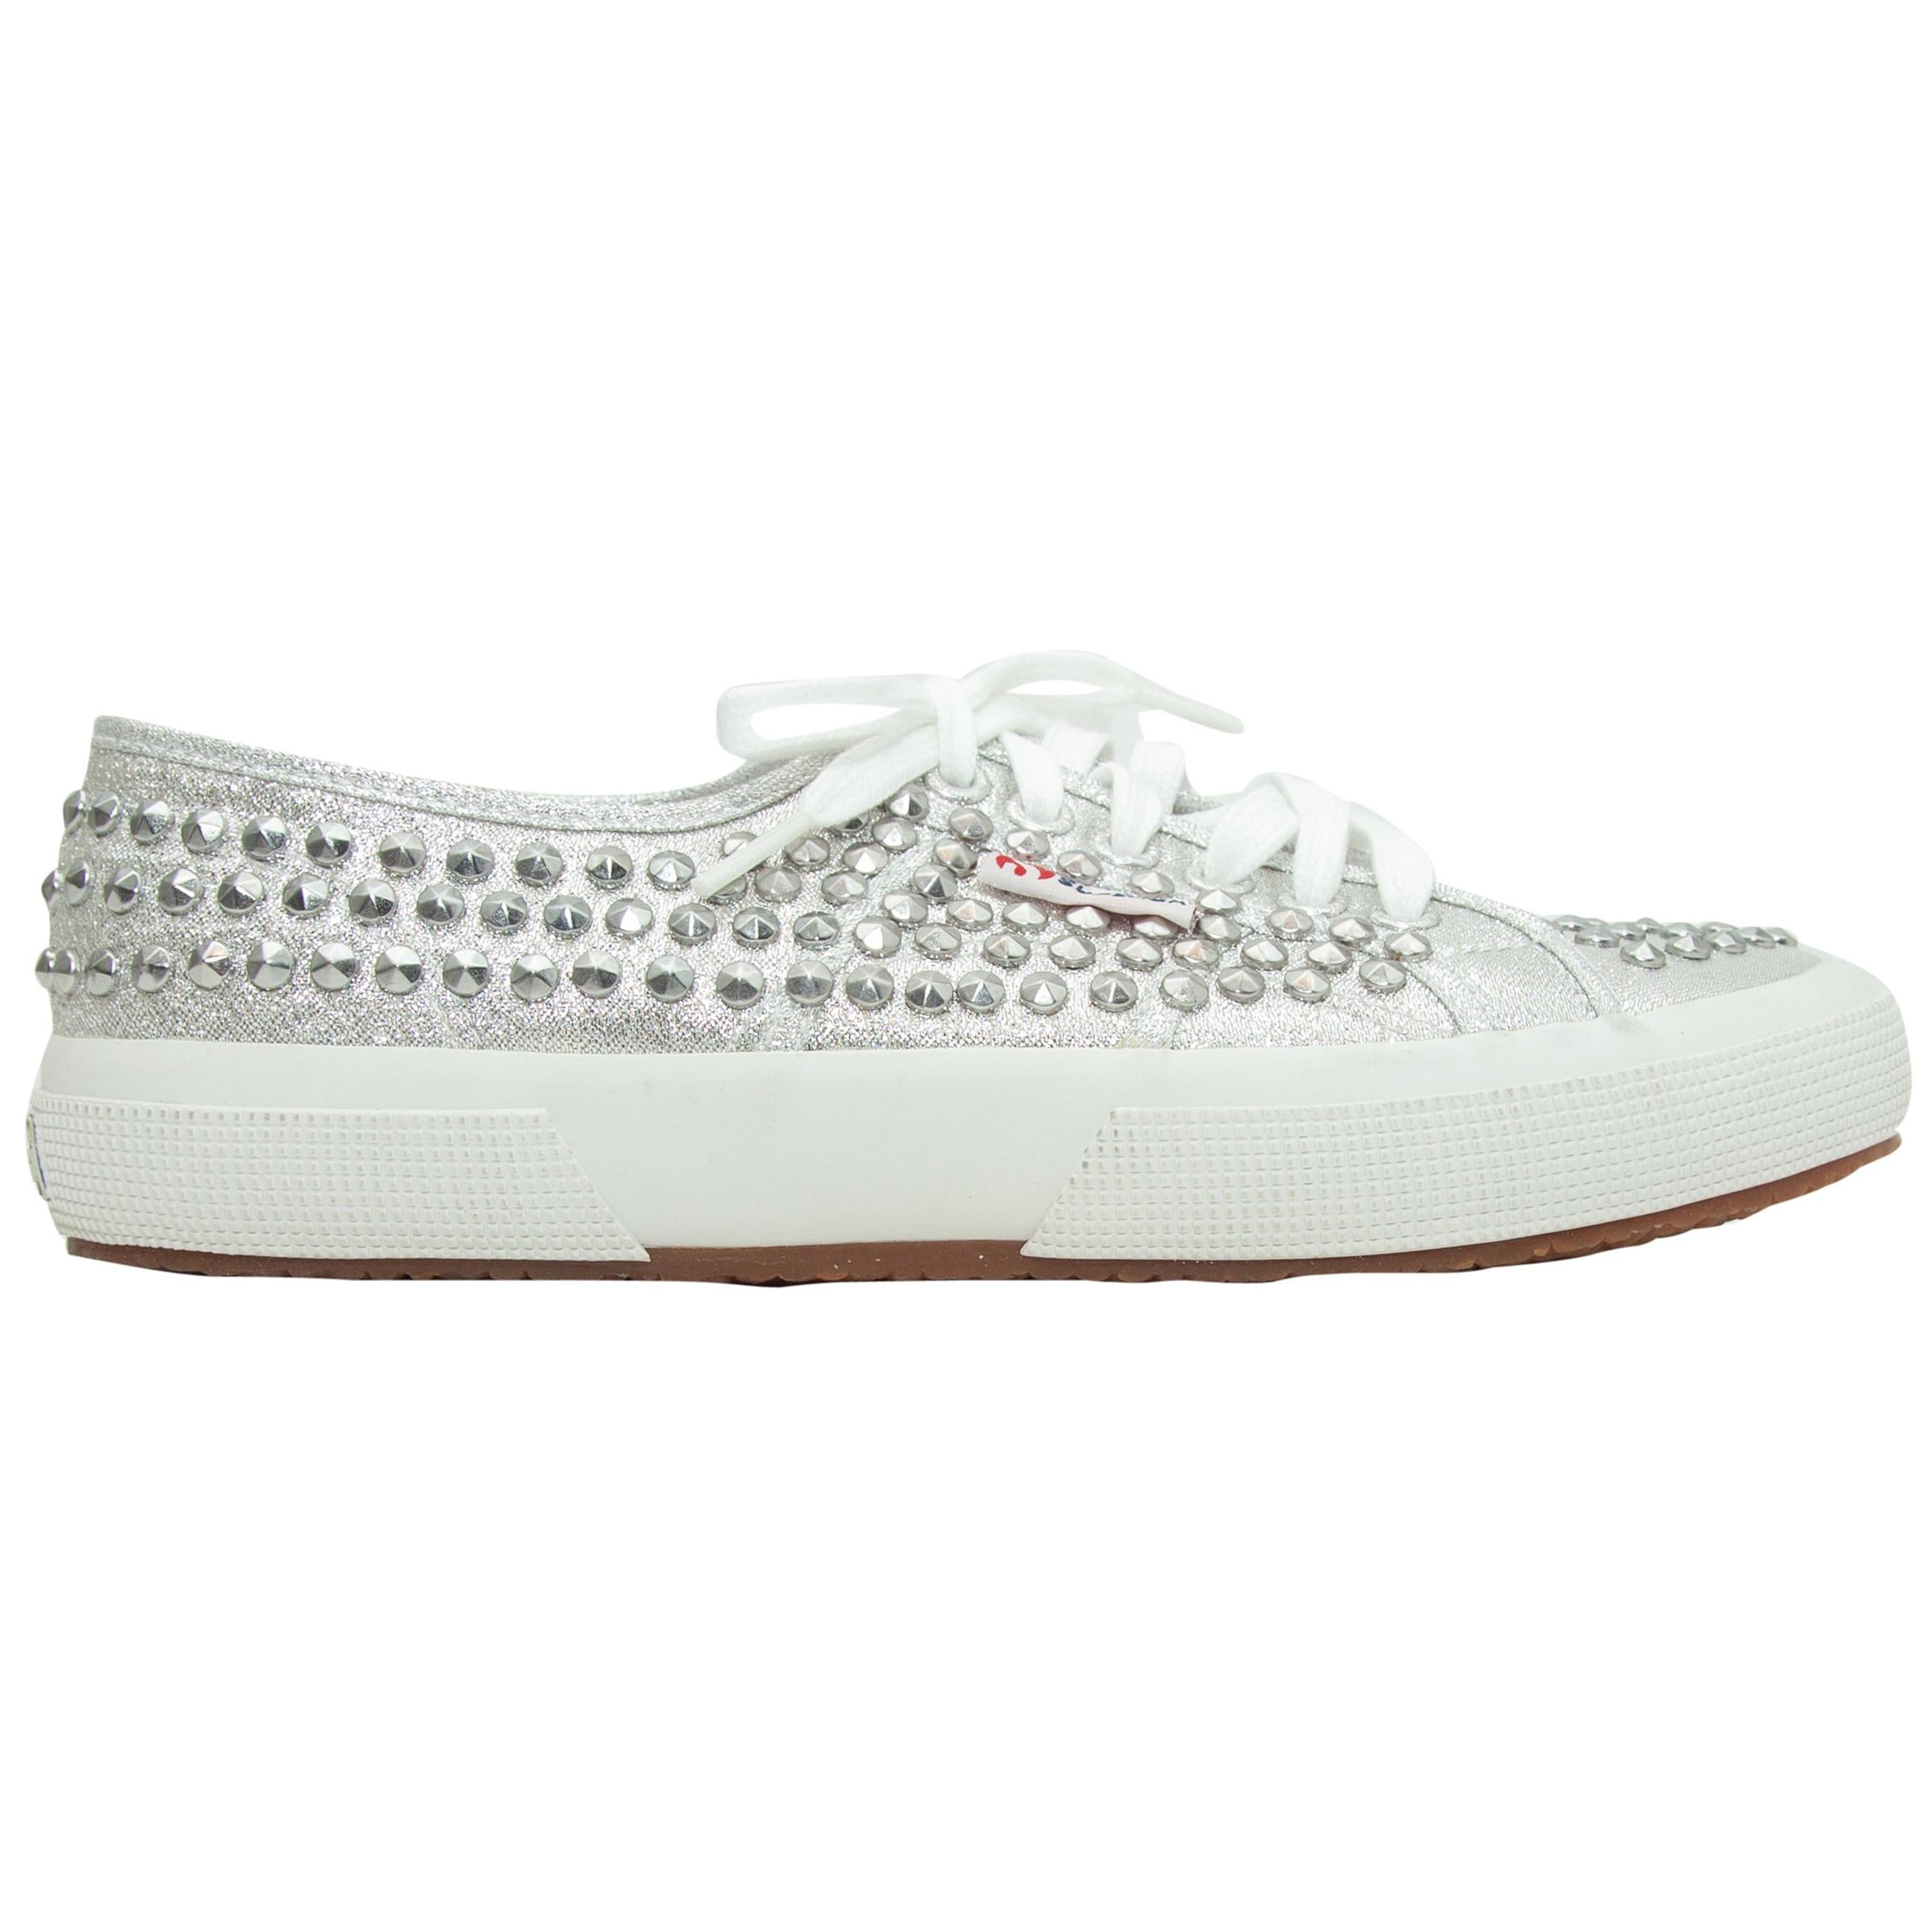 Buy > superga studded sneakers > in stock